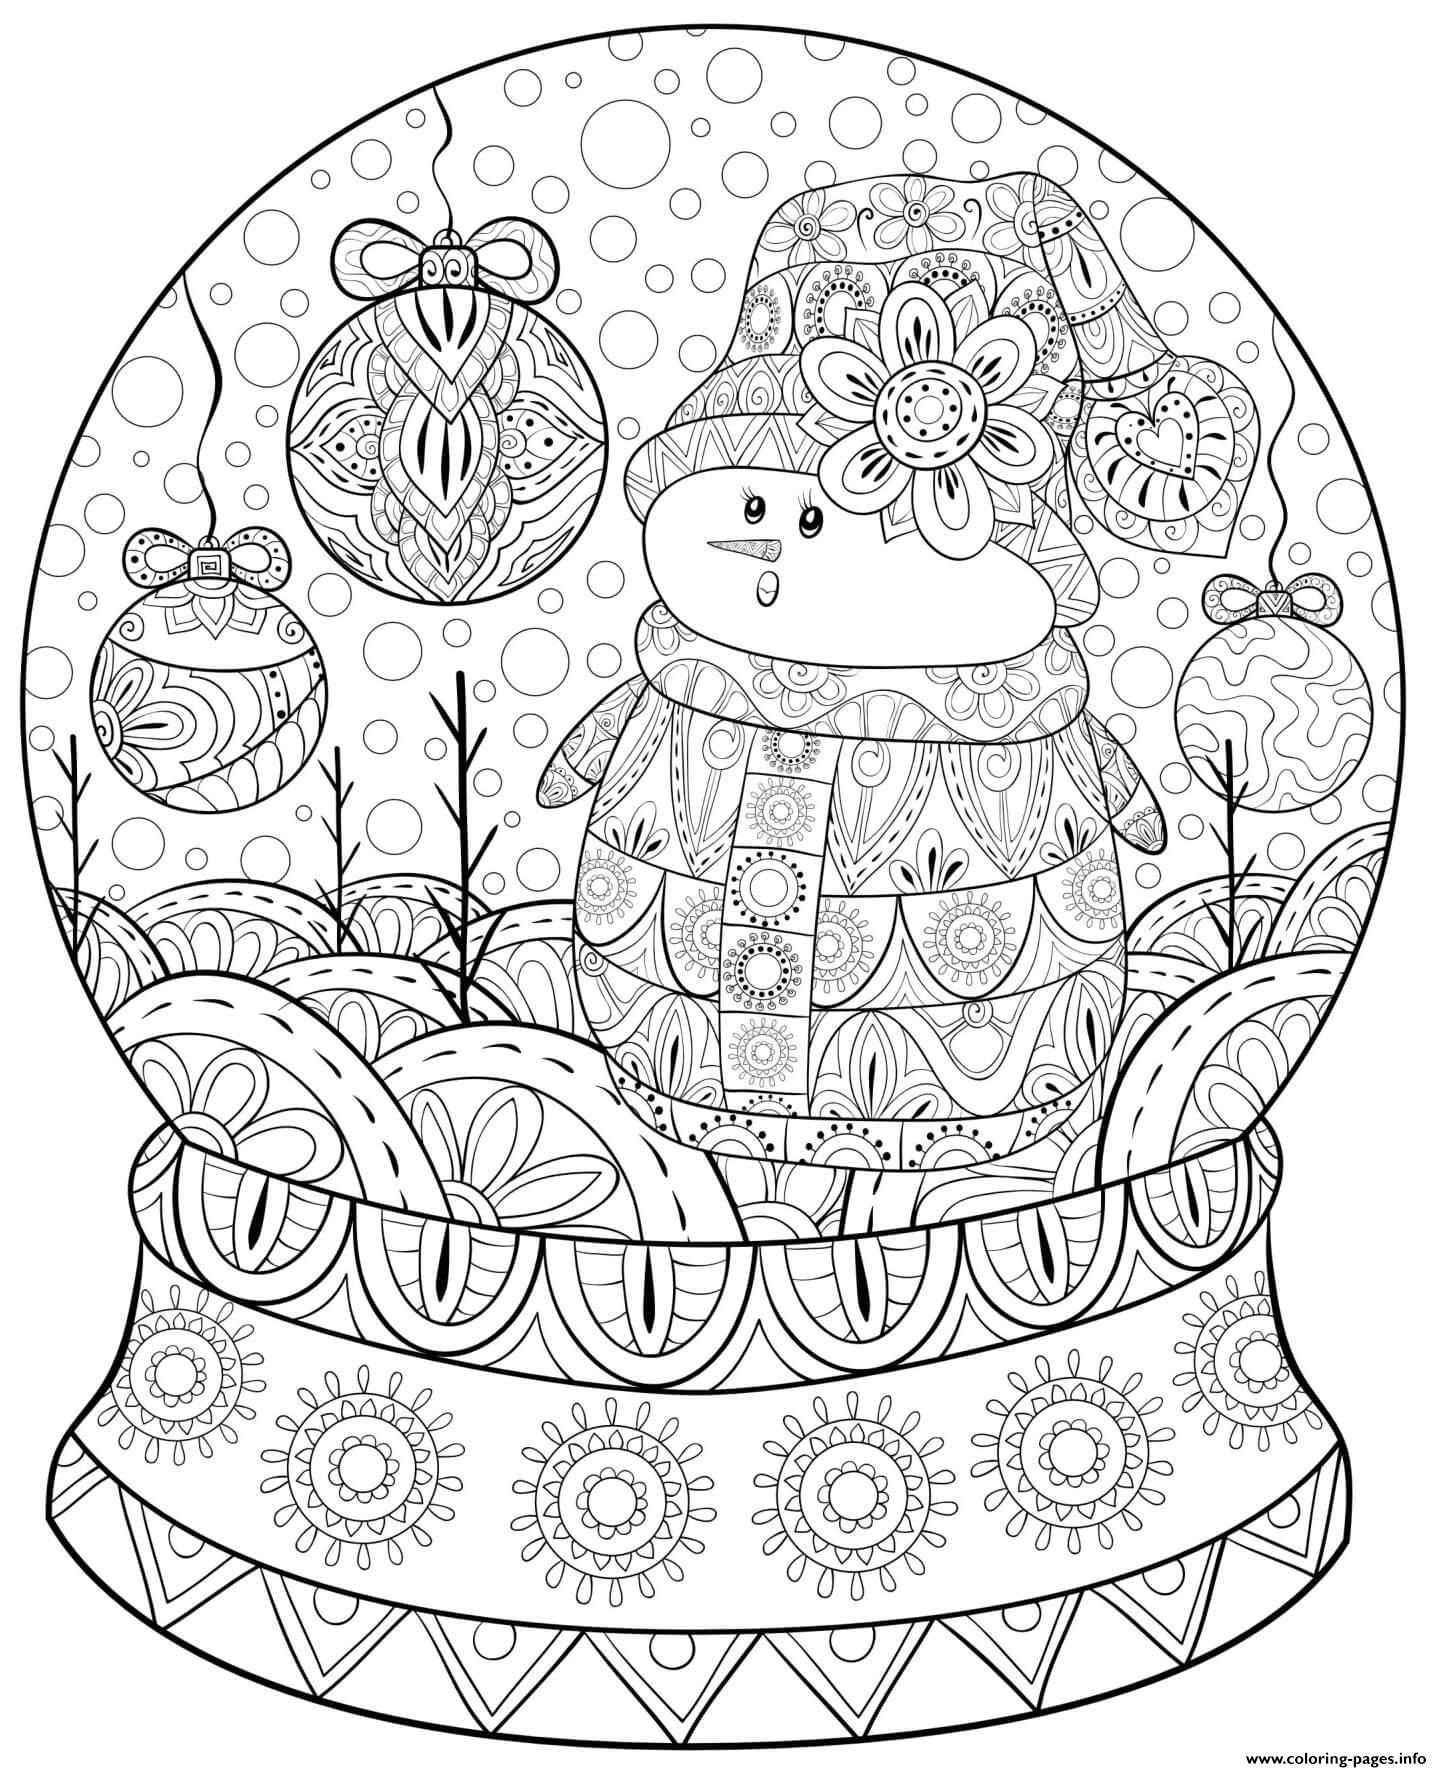 Christmas For Adults Patterned Snowglobe Snowman Coloring Page Printable